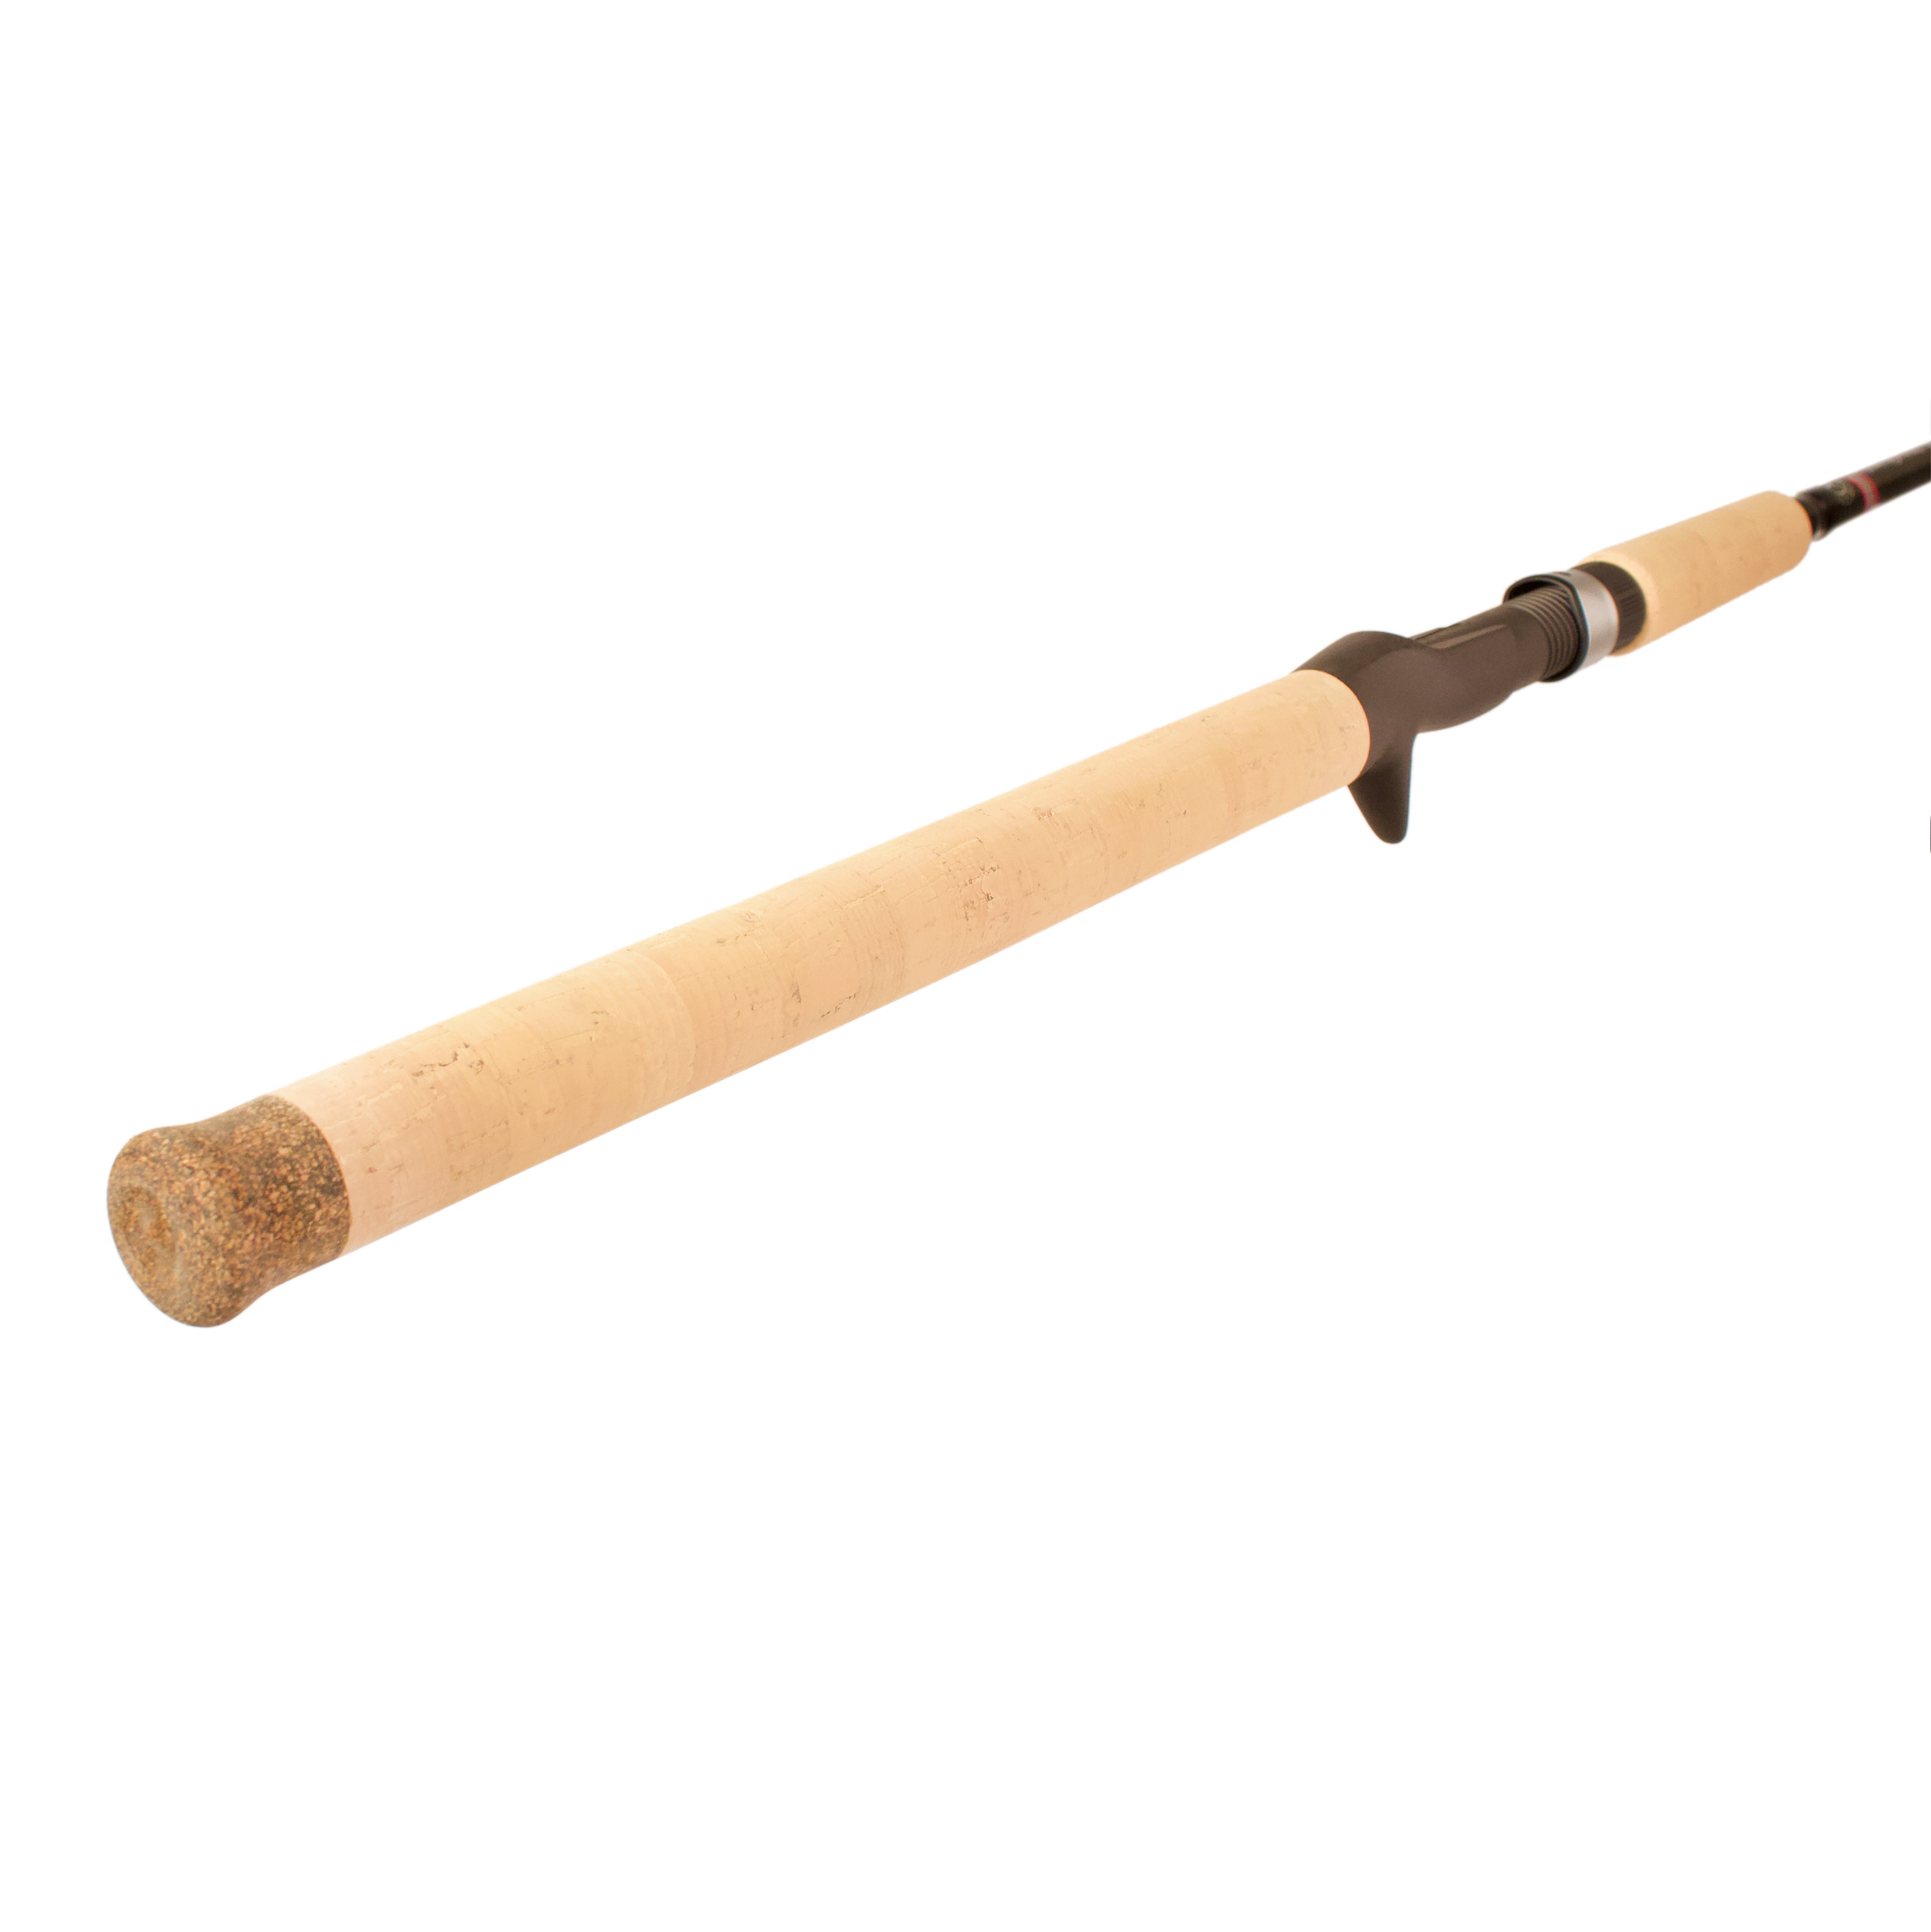 FISHING ROD REVIEW Star Rods Fishing Rods Review Stellar Lite and